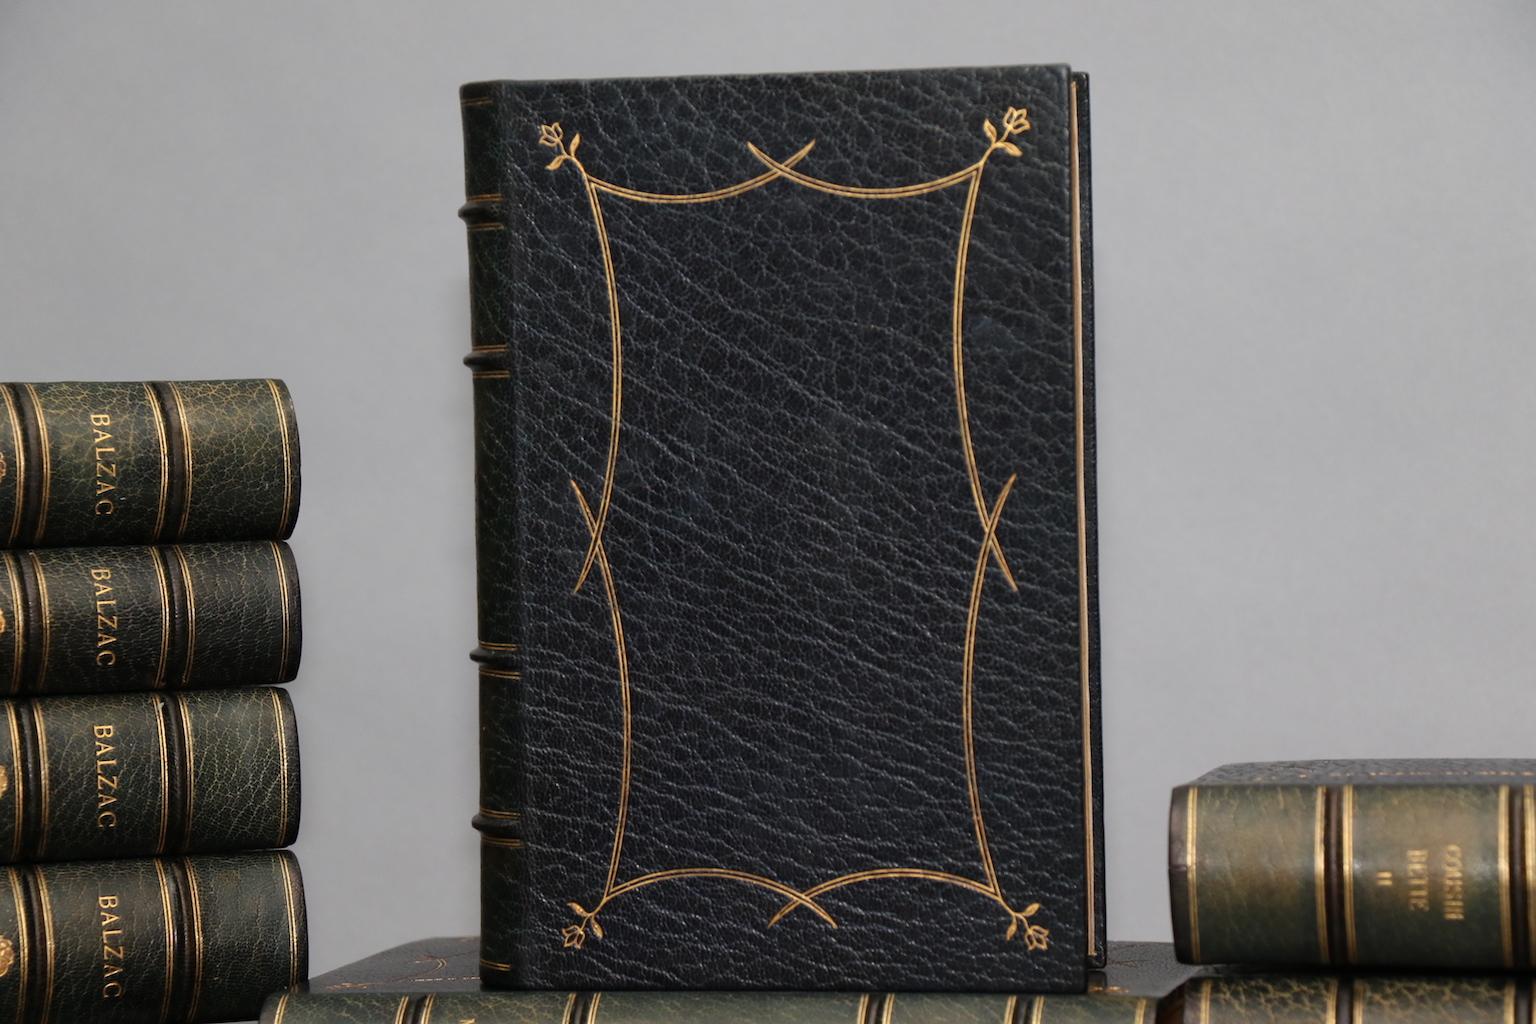 Leatherbound. 53 volumes. Limited to 7 copies, this is #3. Exquisitely bound in full blue morocco, with green morocco gilt doublers, watered silk linings, and all edges gilt. Plates in four states: one on Japanese Vellum, one on India Paper, one on